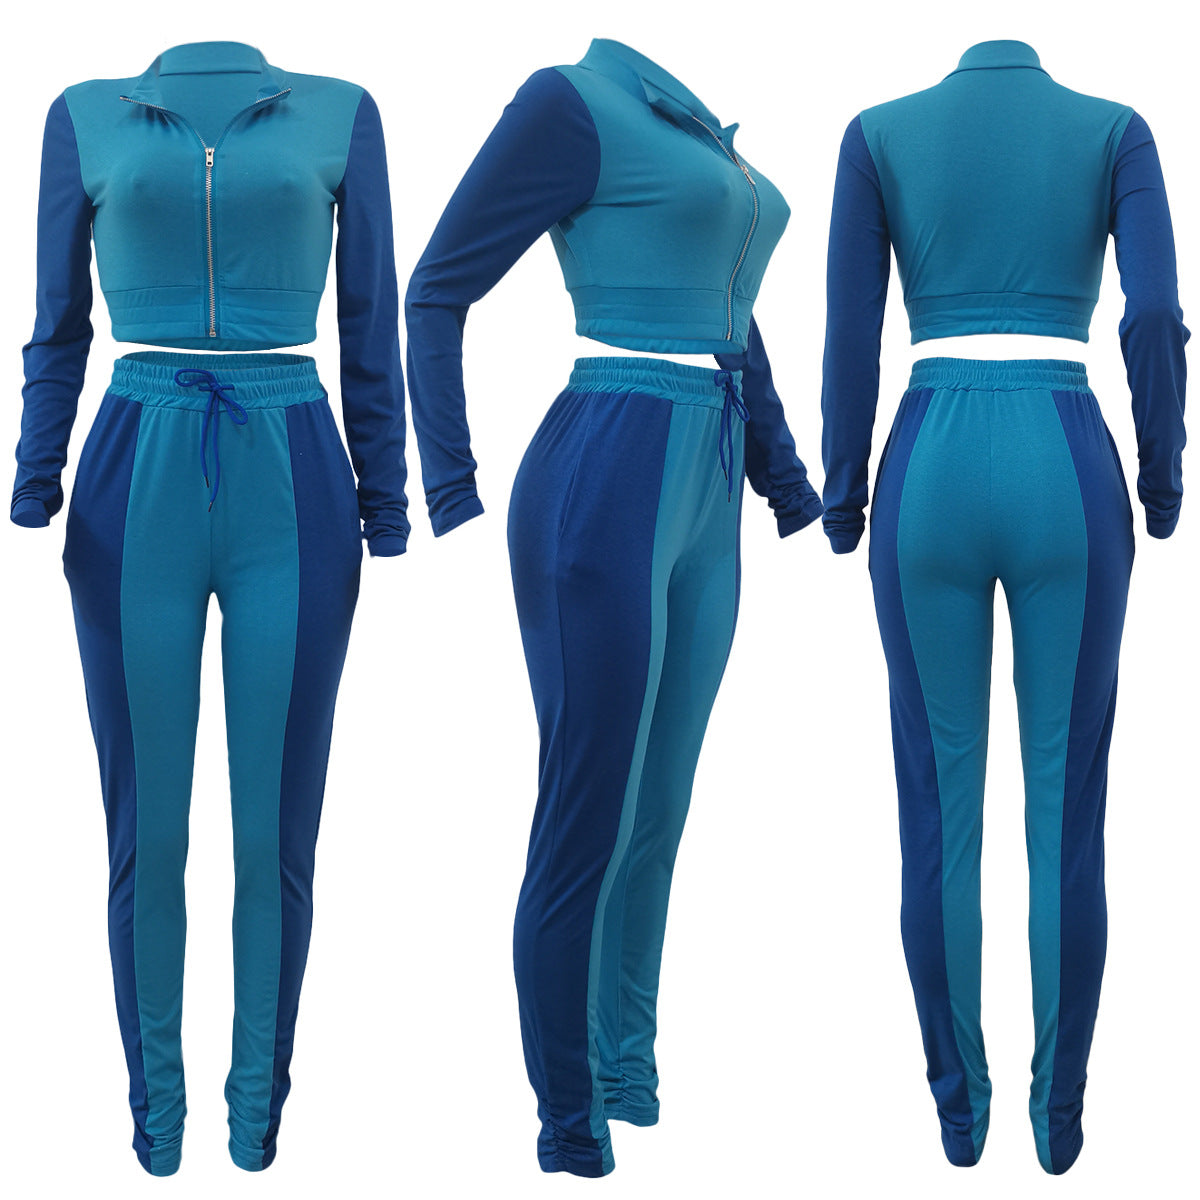 BamBam Women Autumn and Winter Casual Color Block Long Sleeve Top and Pant Two-piece Set - BamBam